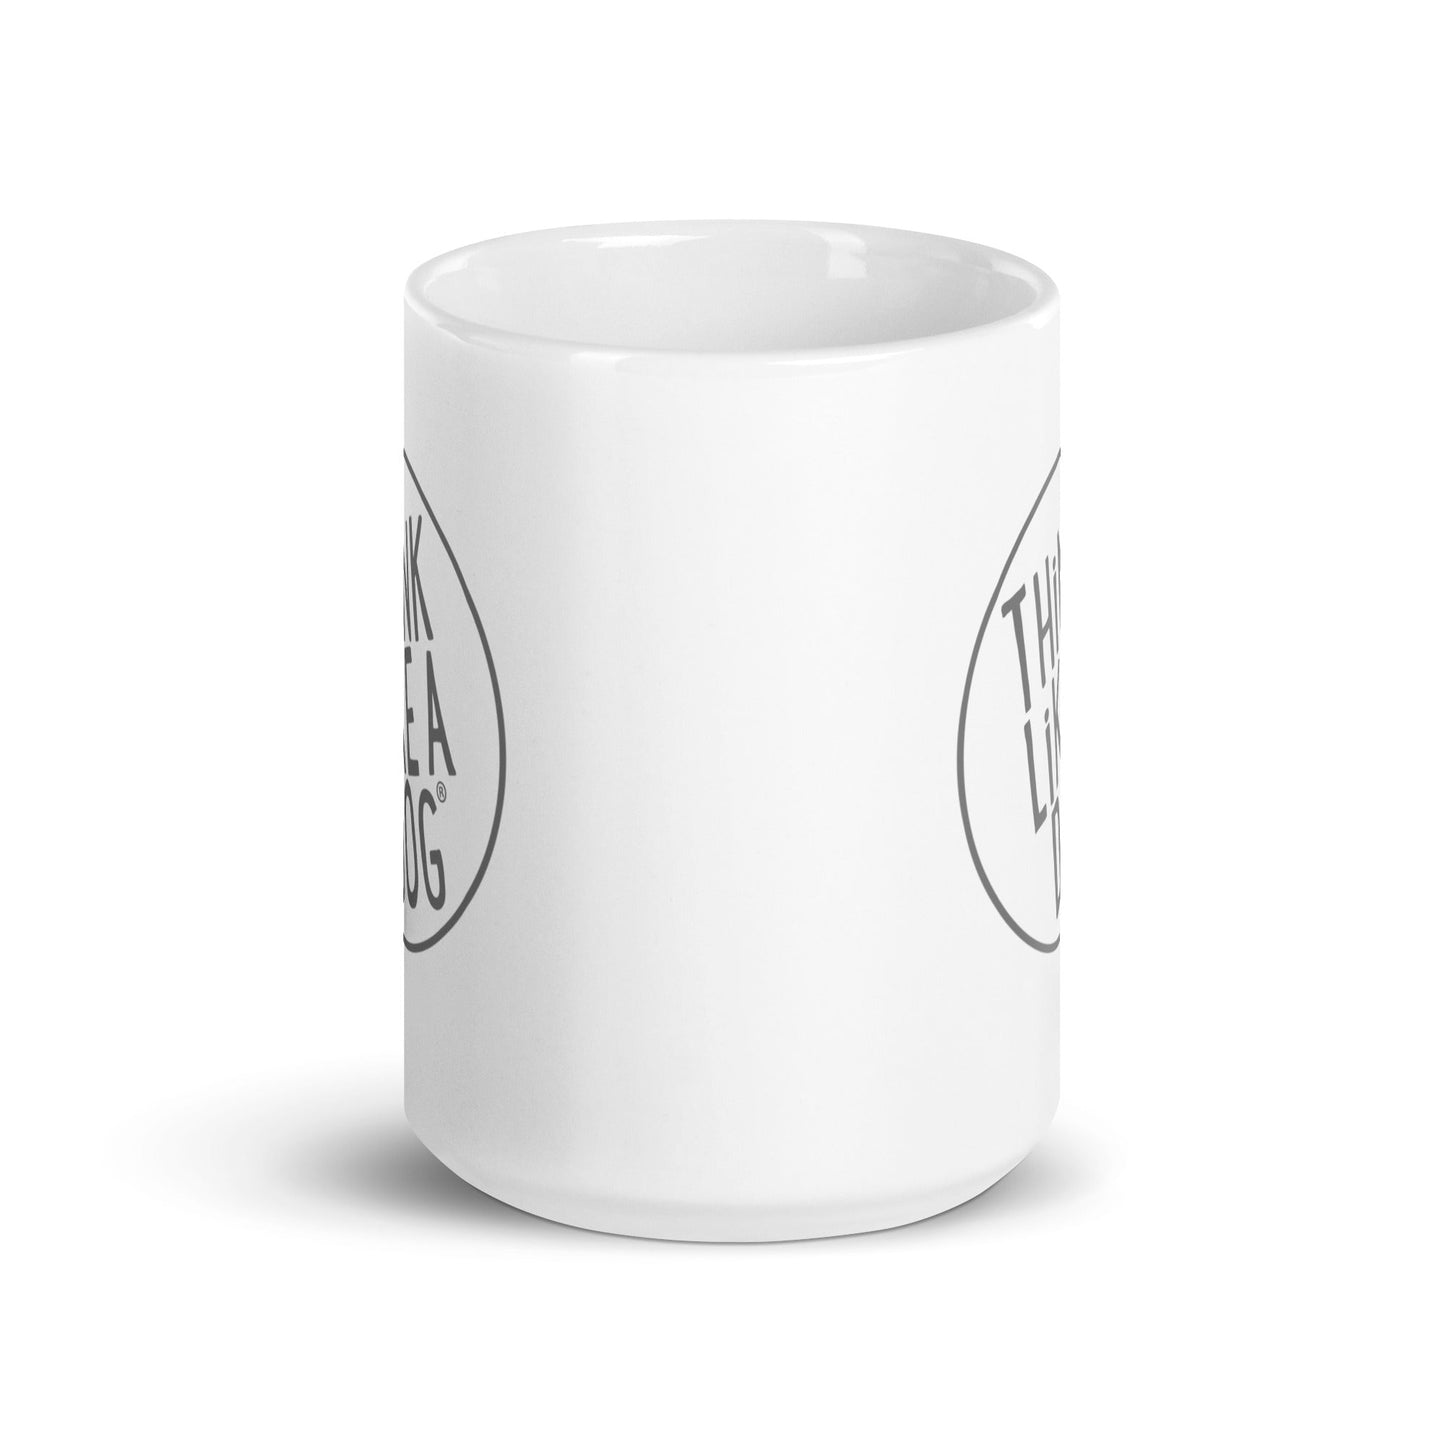 White glossy mug with THiNK LiKE A DOG® logo design for dog lovers on a white background.